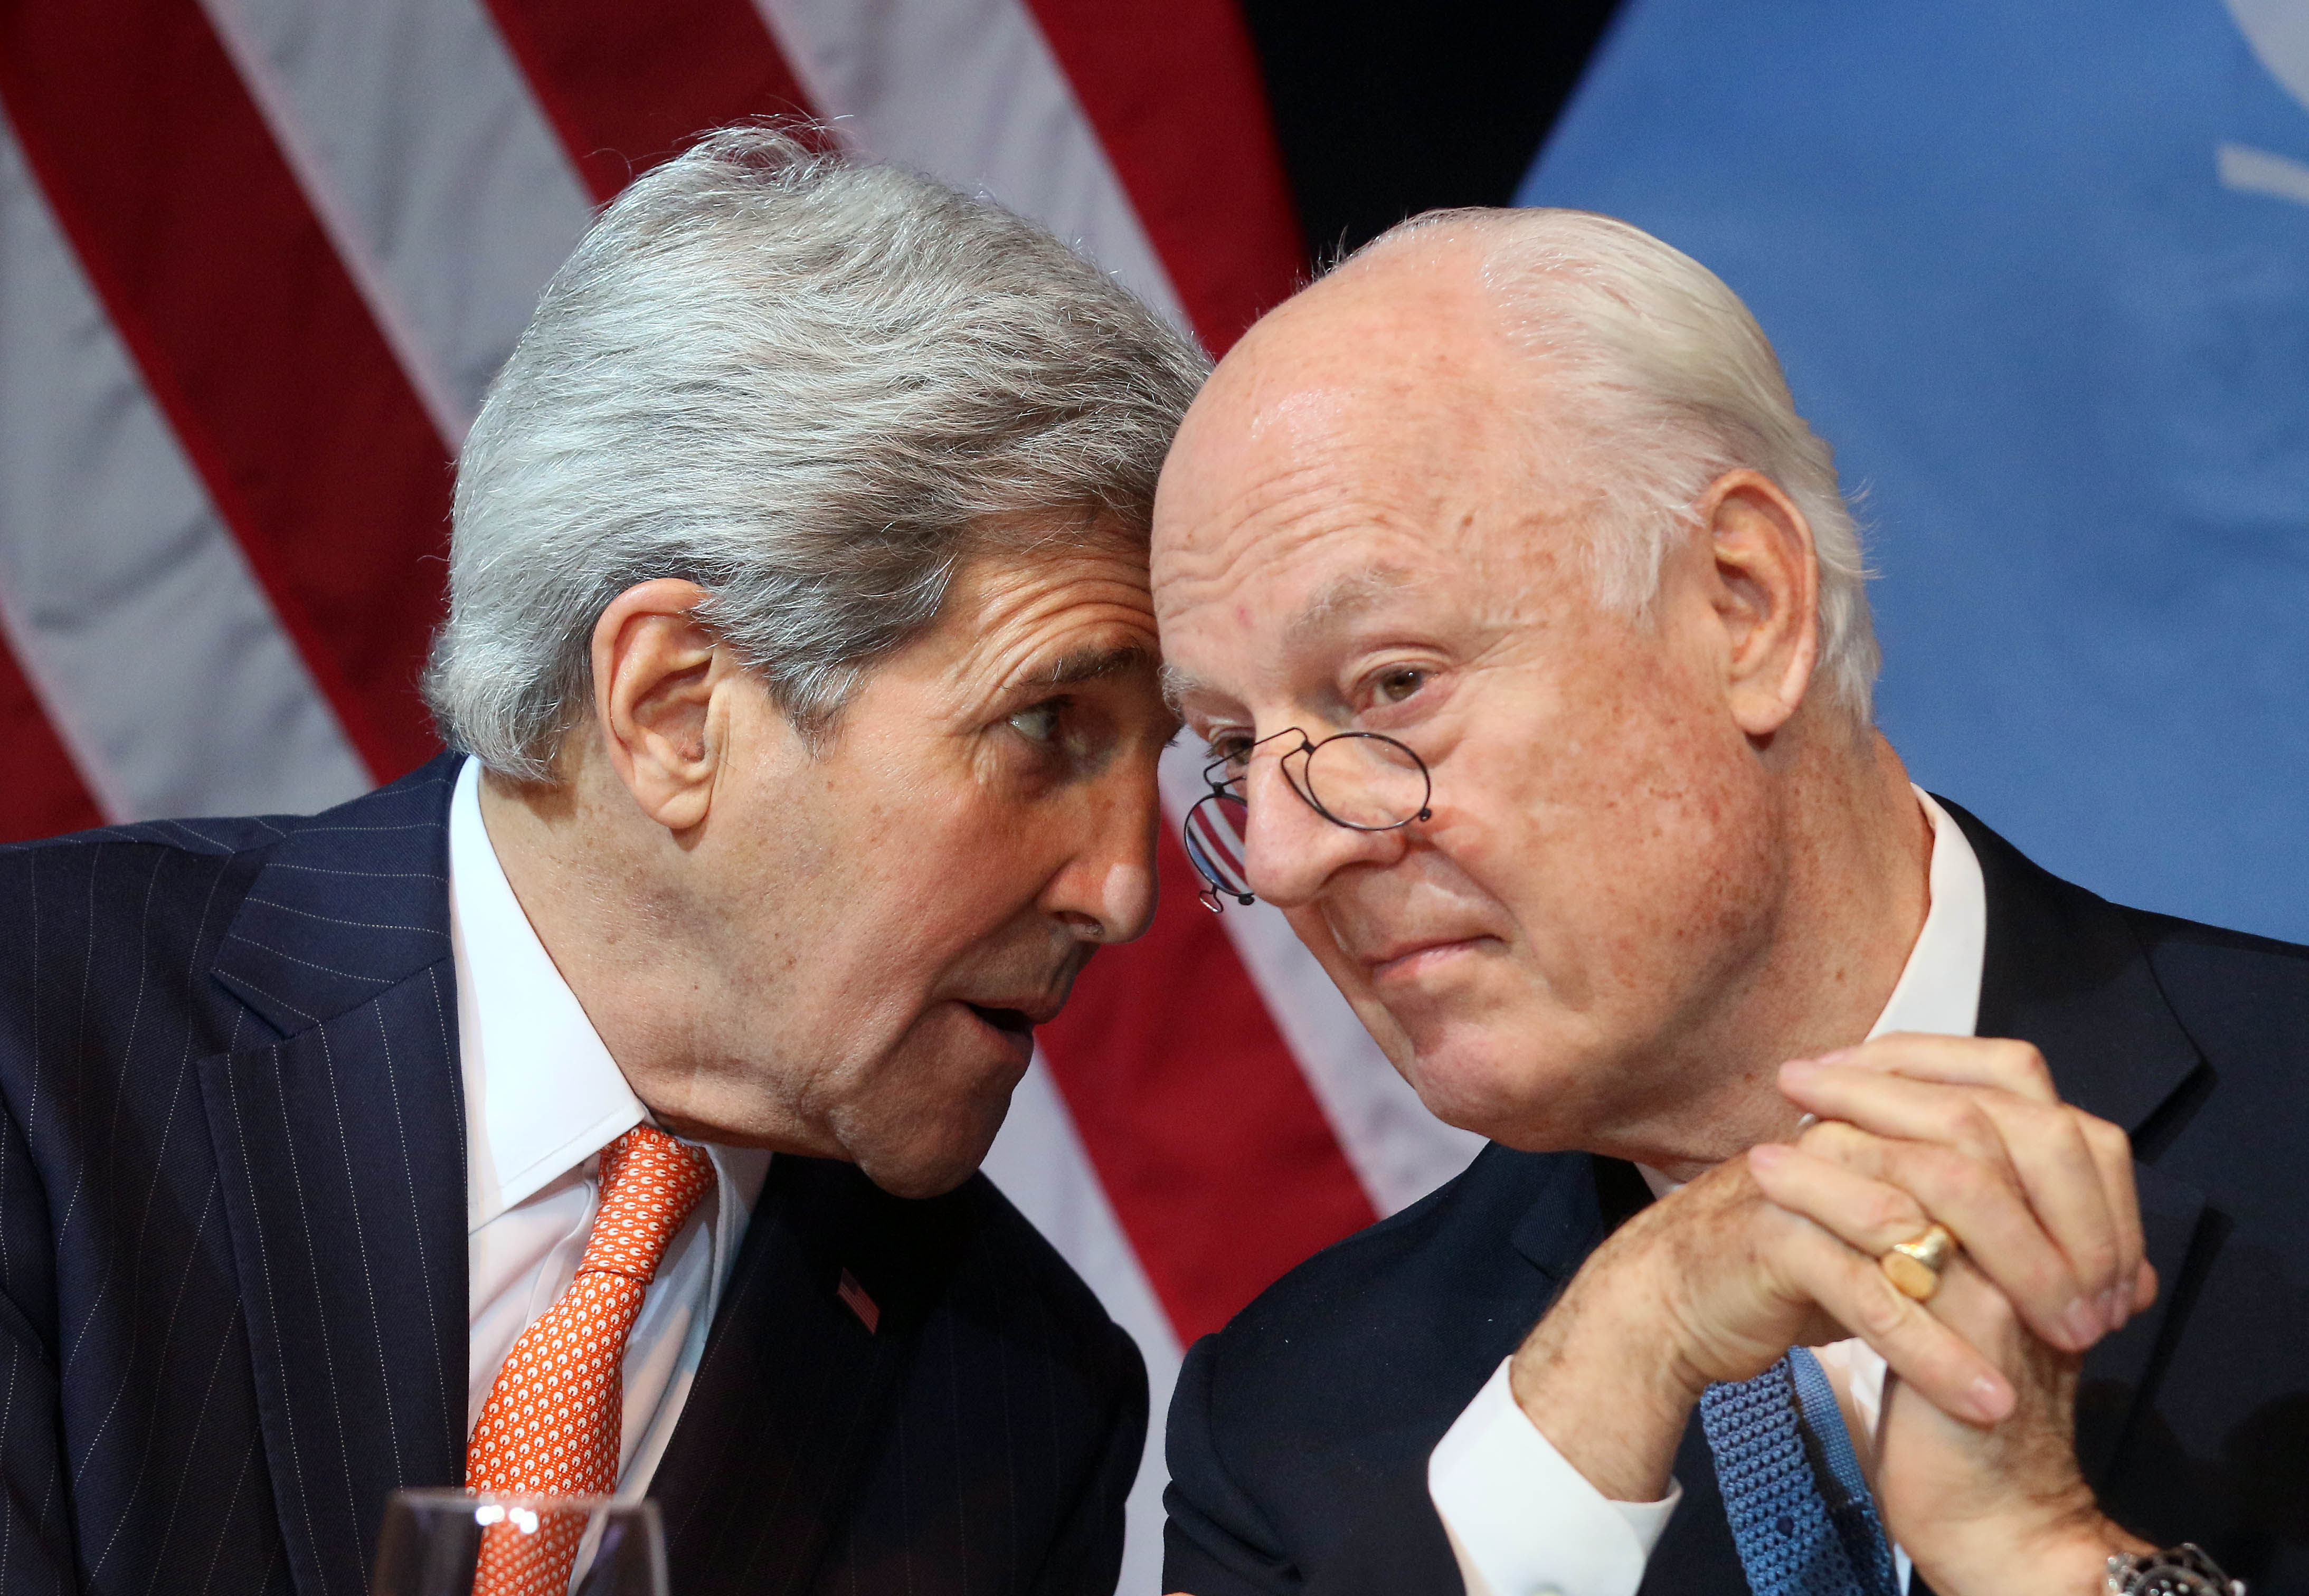 U.S. Secretary of State John Kerry speaks with U.N. Special Envoy for Syria Staffan de Mistura during a news conference in Vienna on Saturday. | AP